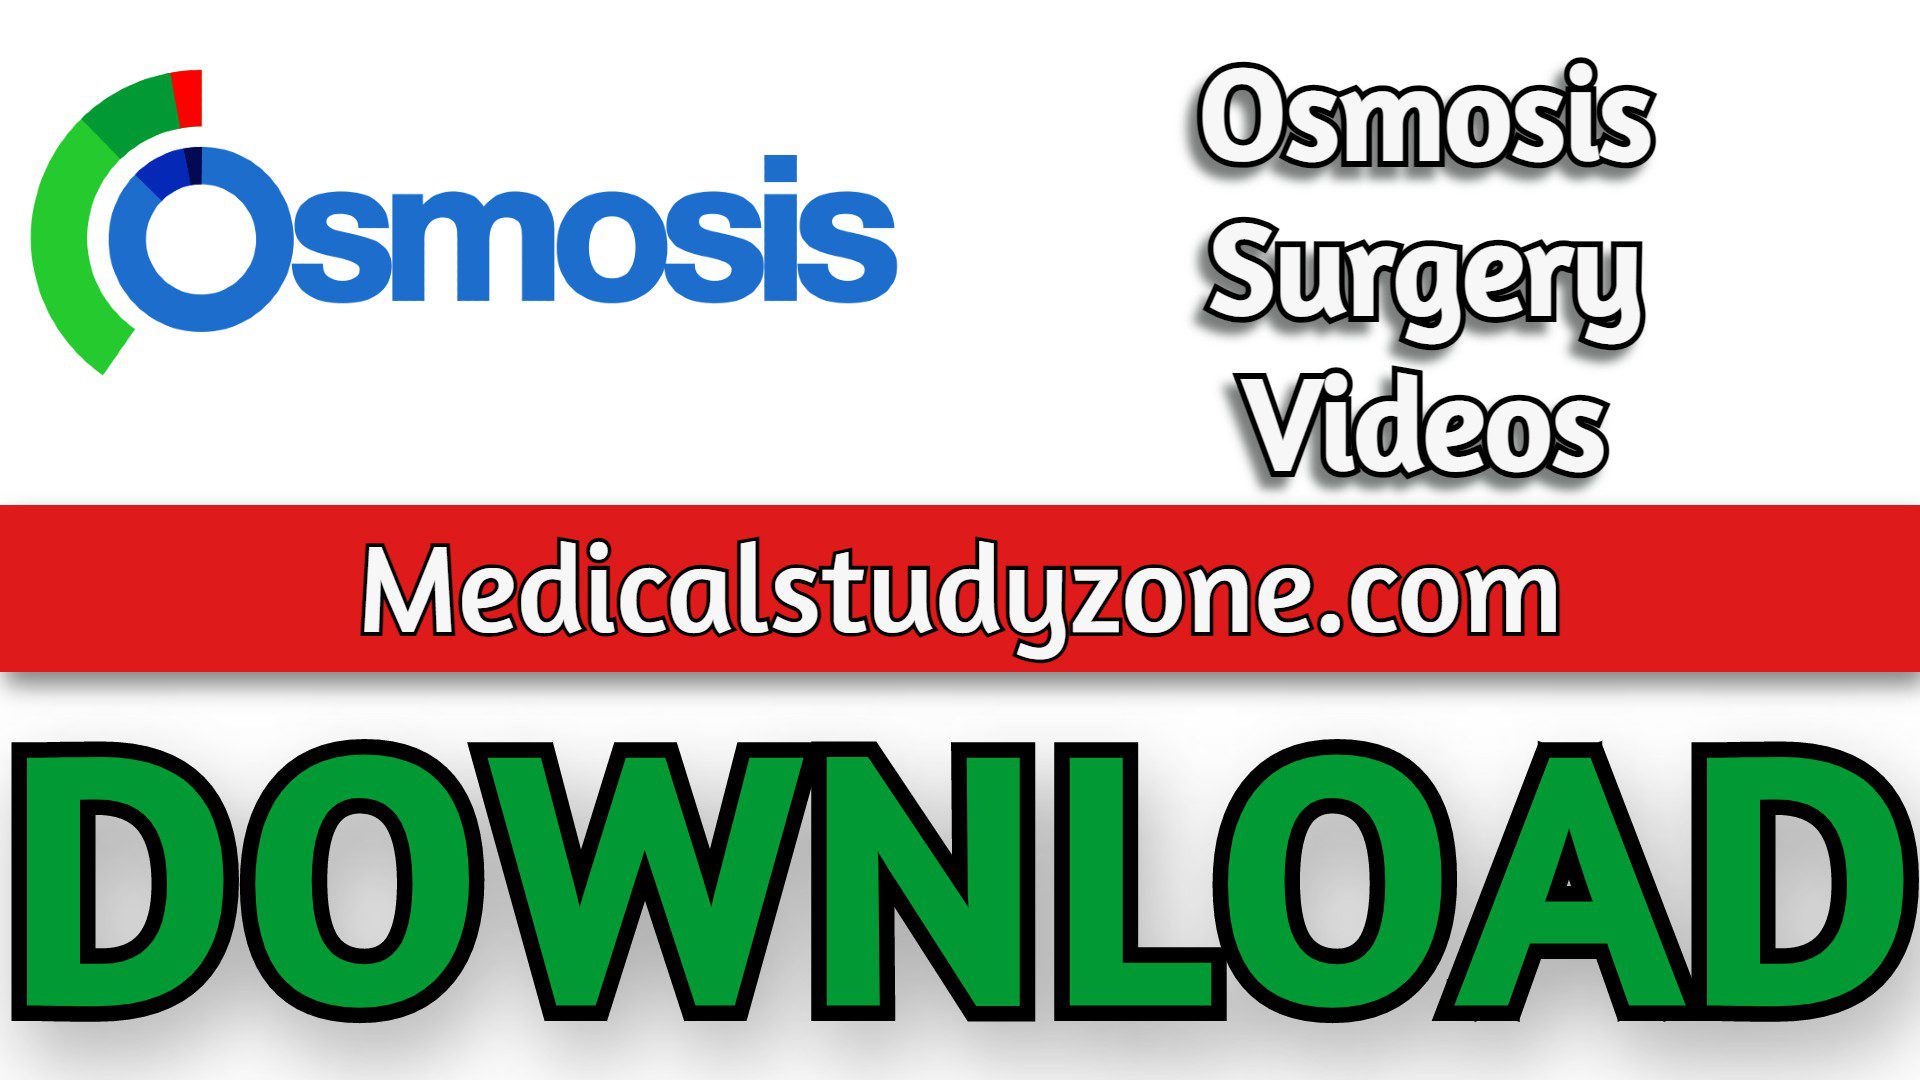 Osmosis Surgery Videos 2022 Free Download